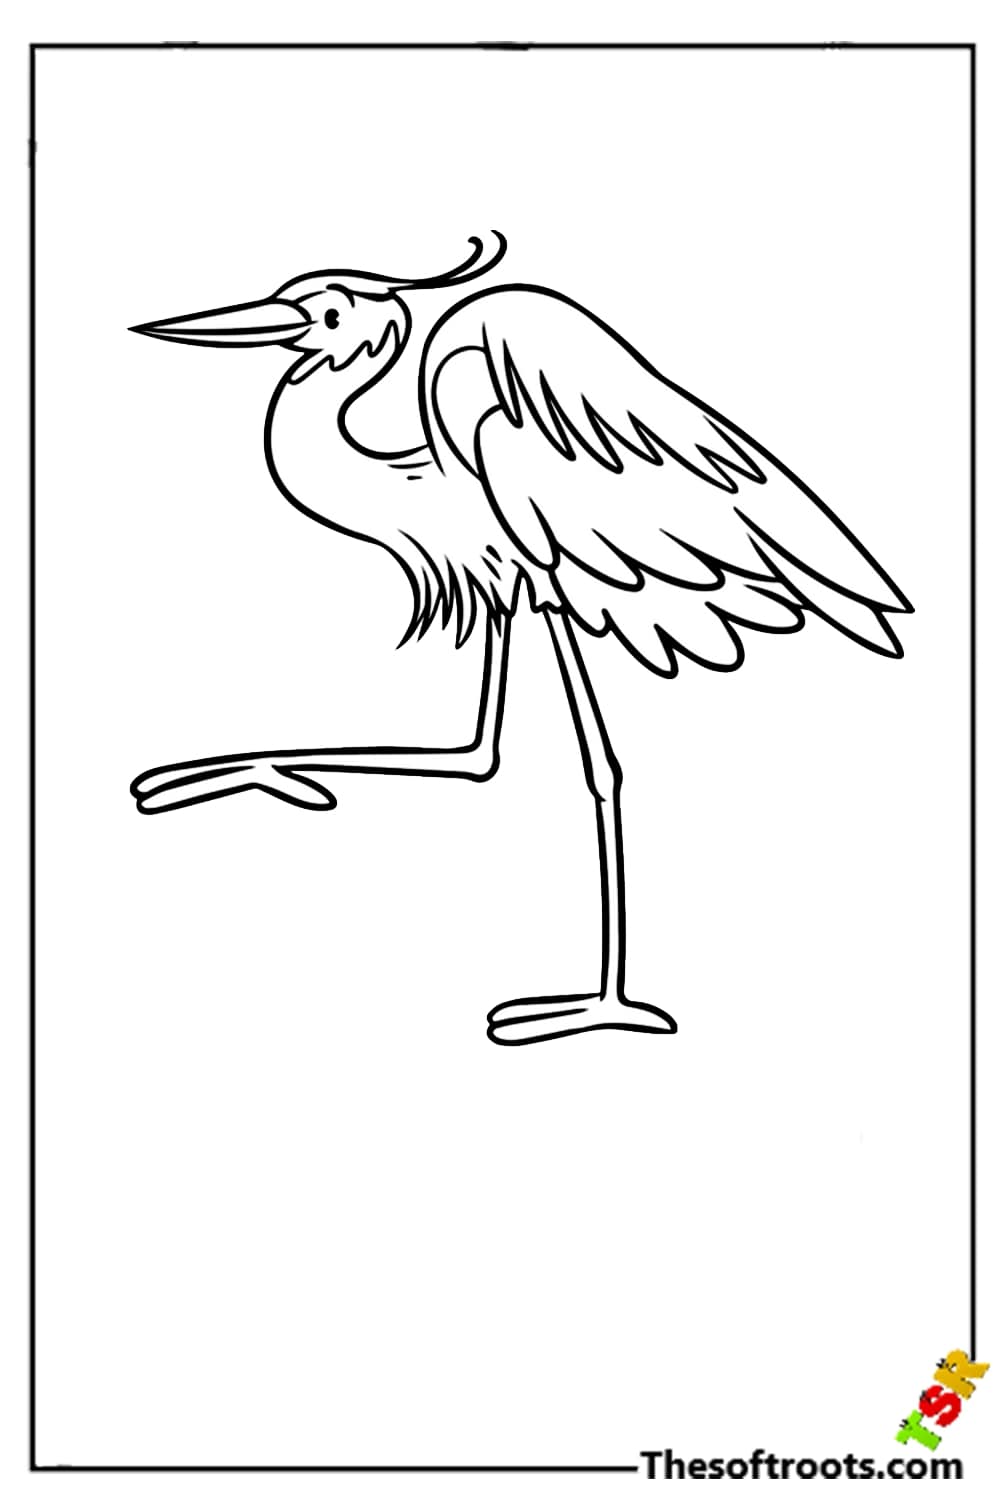 heron birds coloring pages